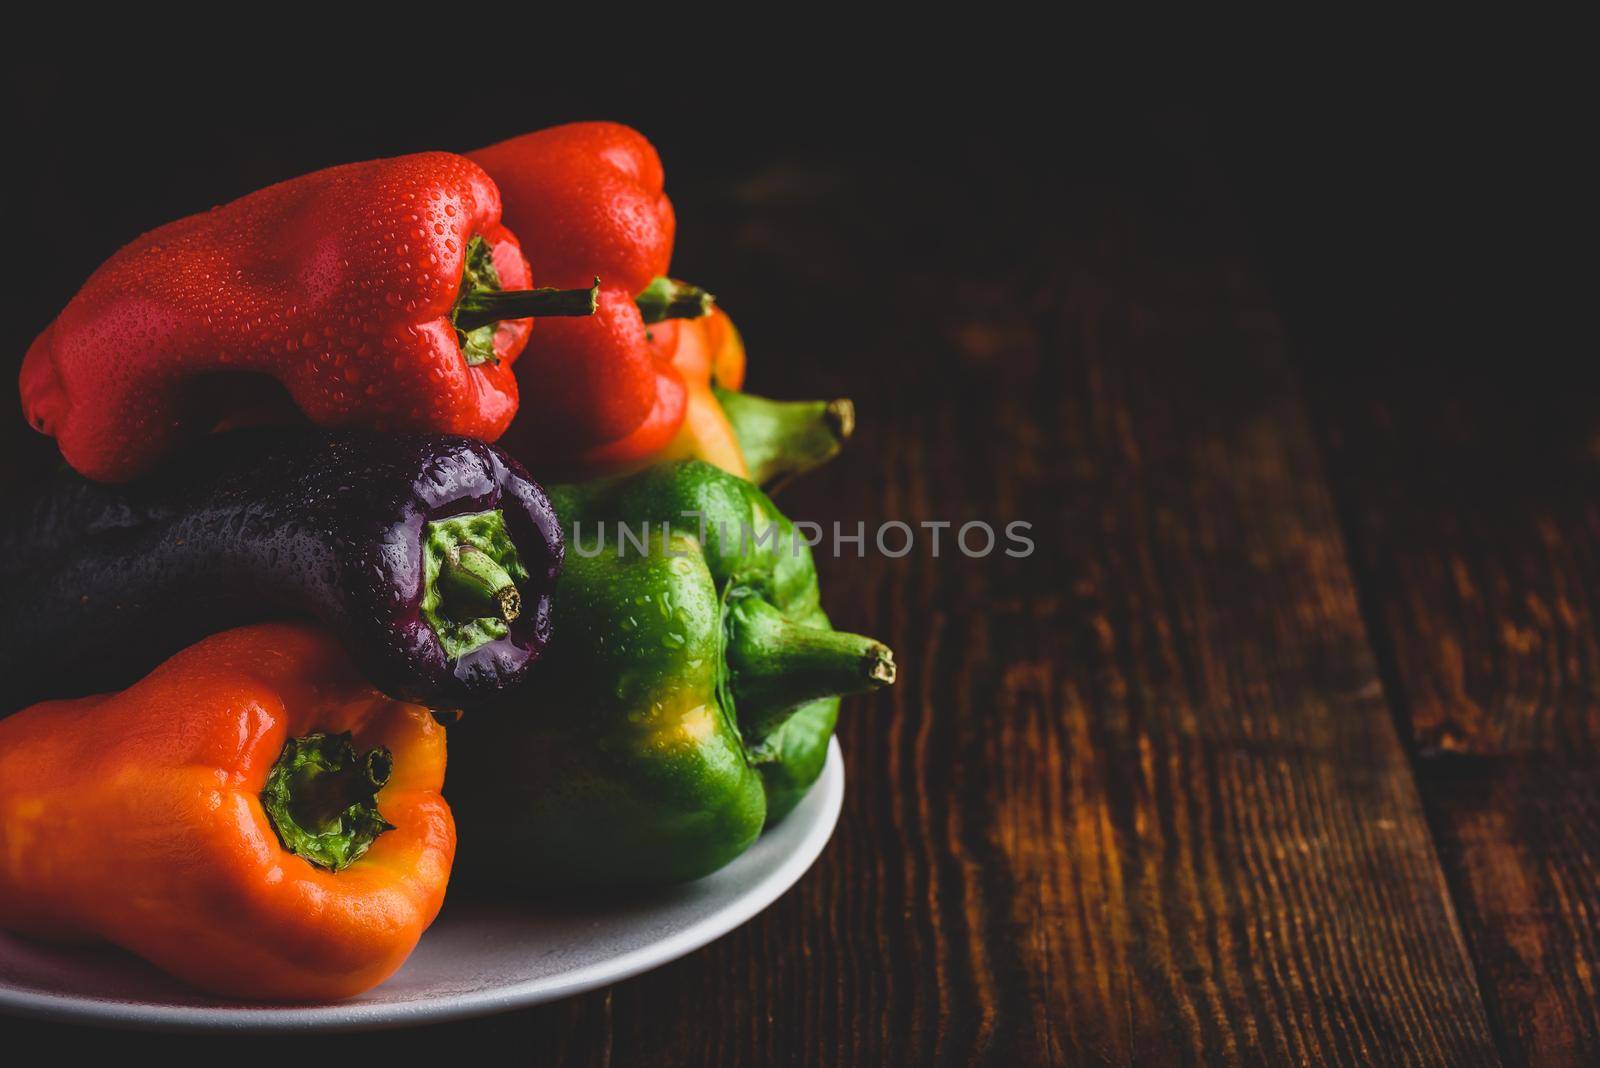 Multicolored fresh bell peppers on plate over wooden background